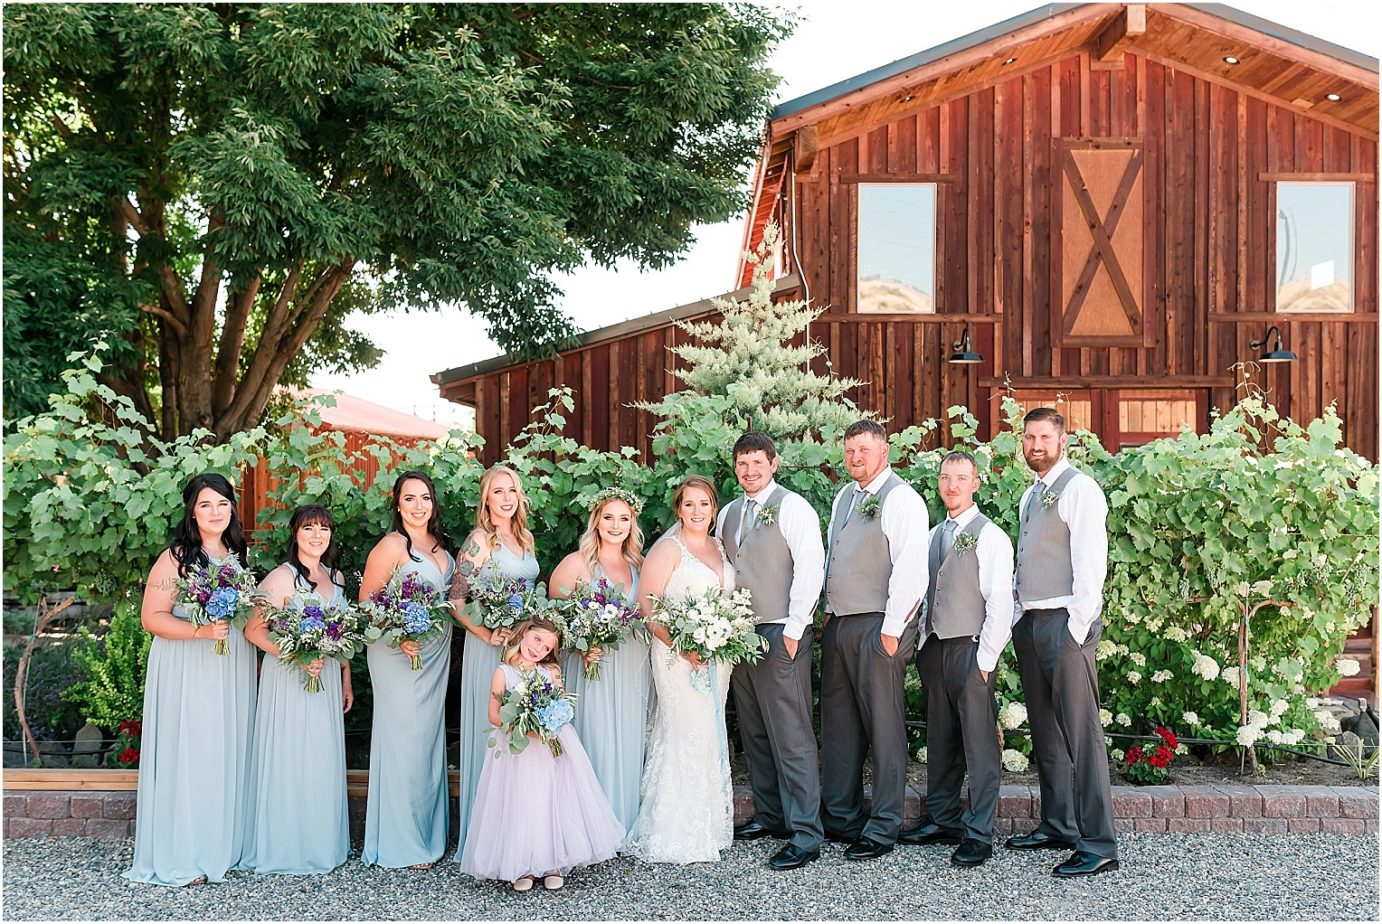 Sugar Pine Barn Wedding Party in front of barn